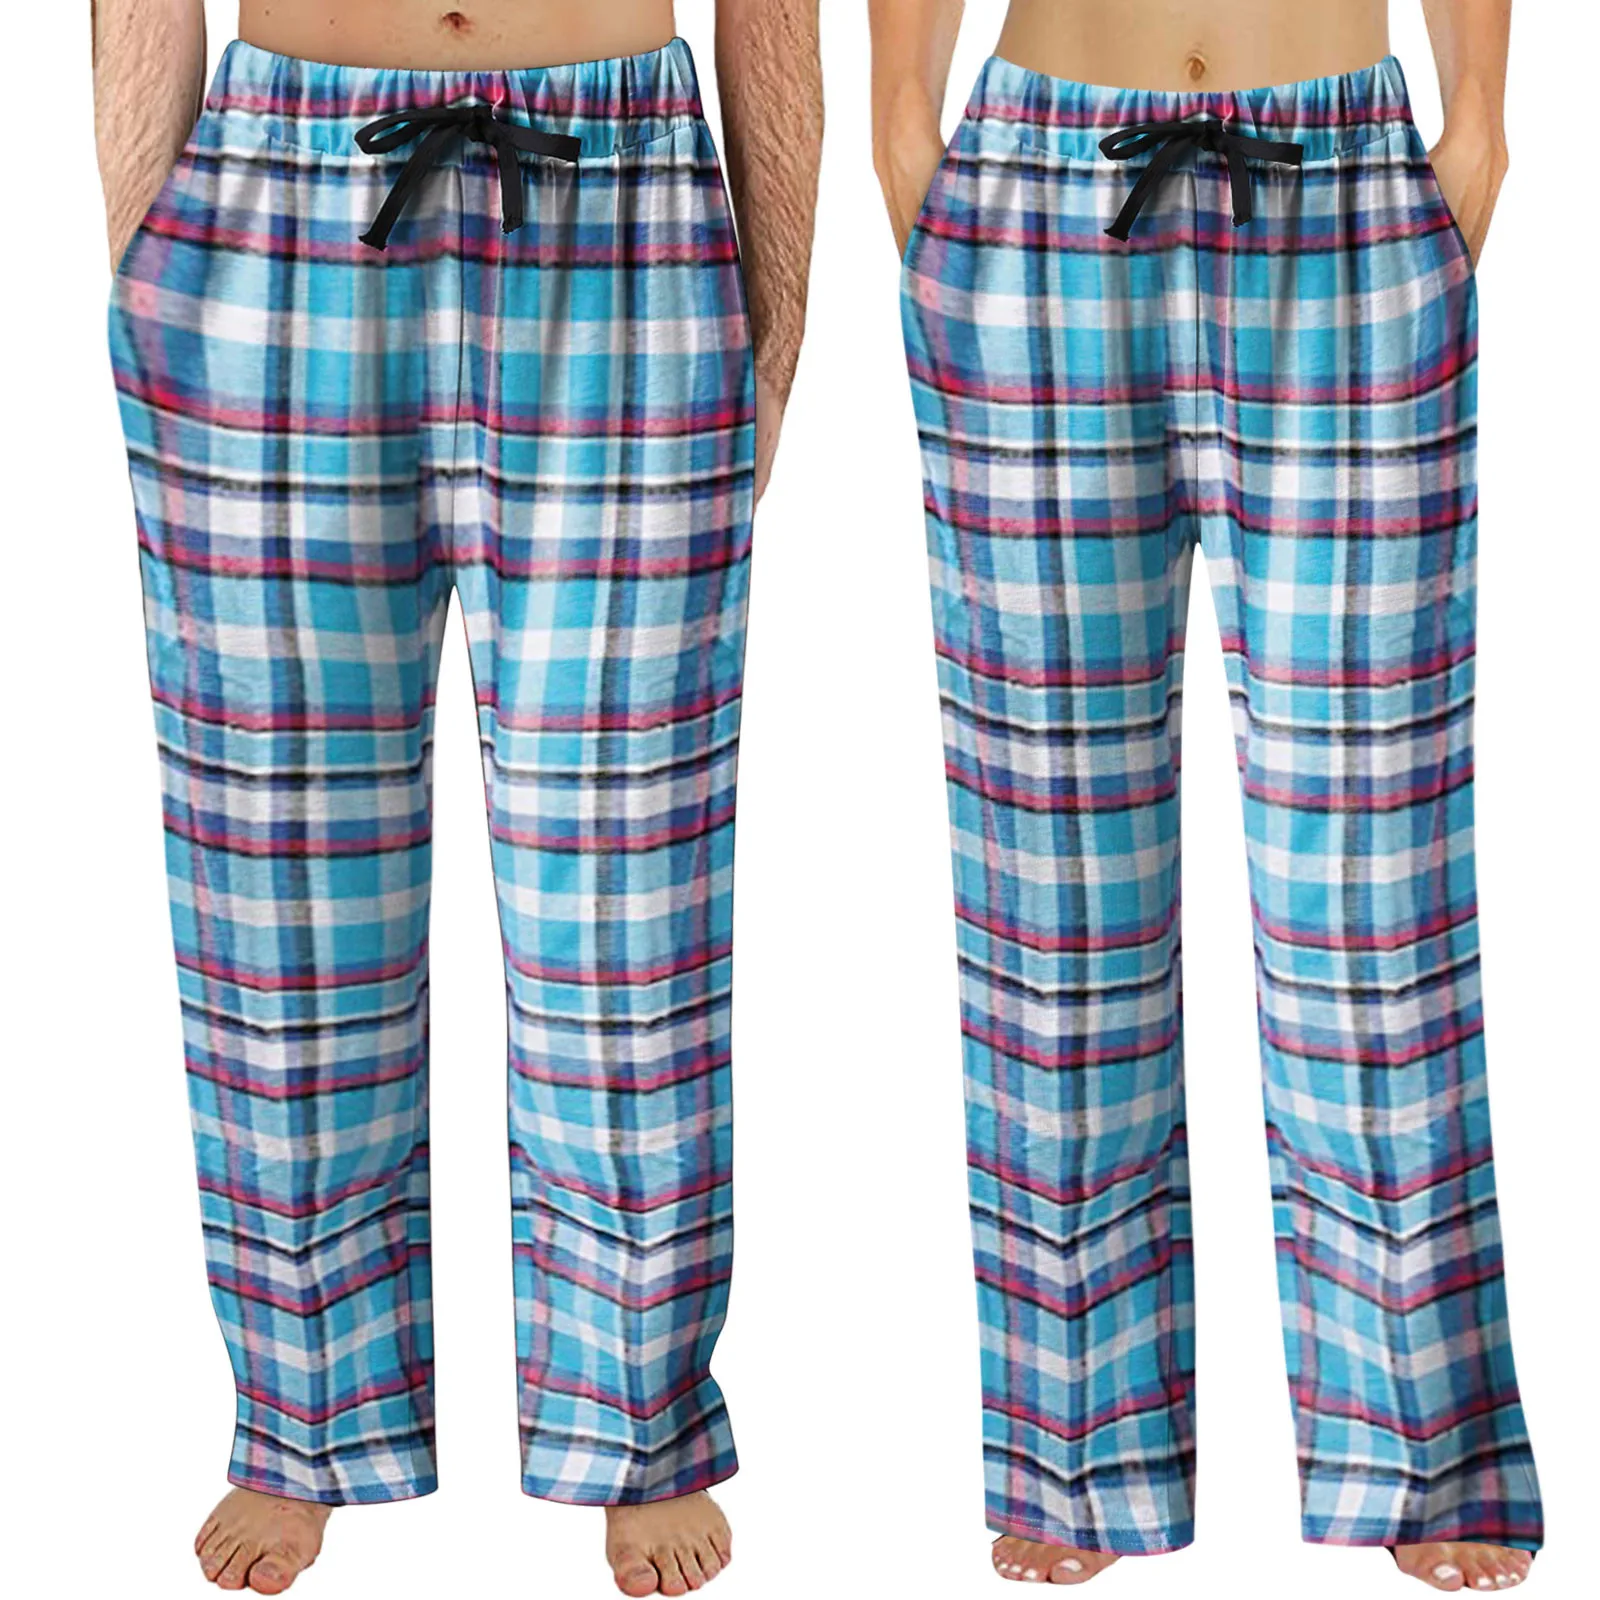 New In Plaid Lace Cotton Can Be Worn Outside Cargo Pants Women